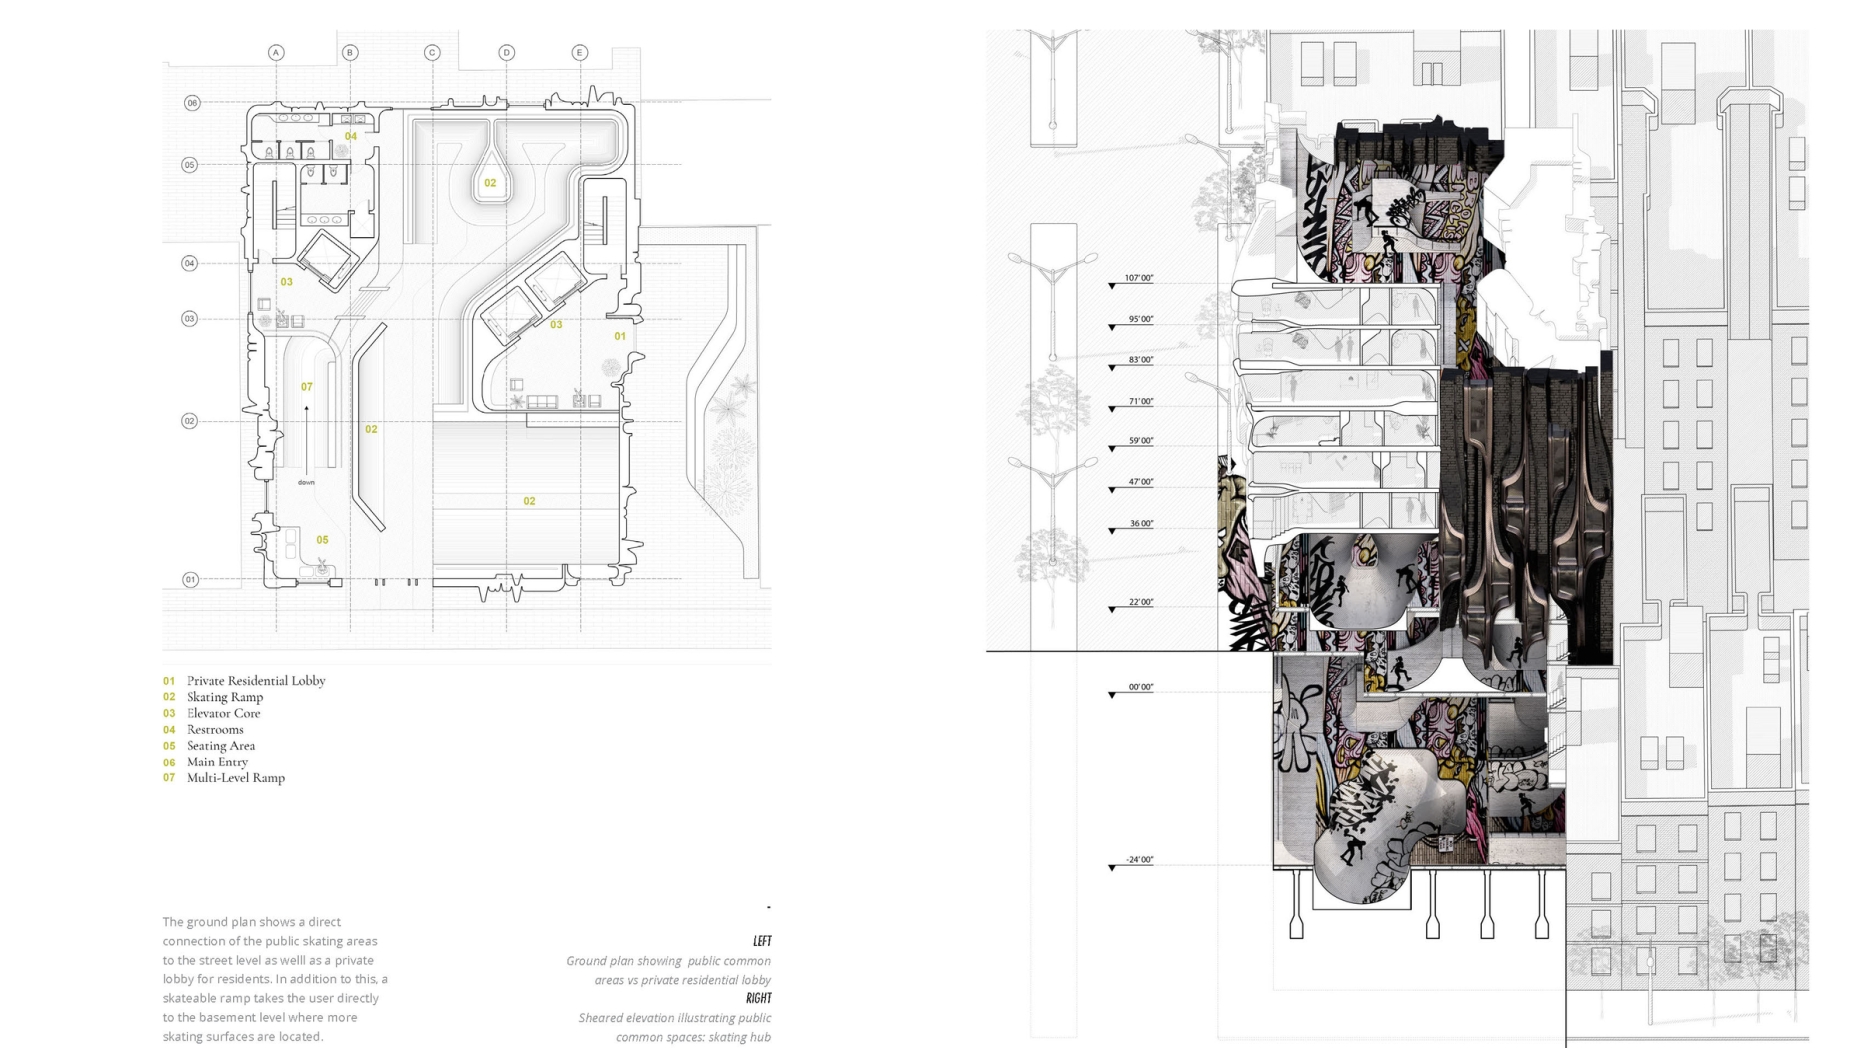 Sideview and floor plan that shows how skate park moves up through every level of the apartment complex up to the roof